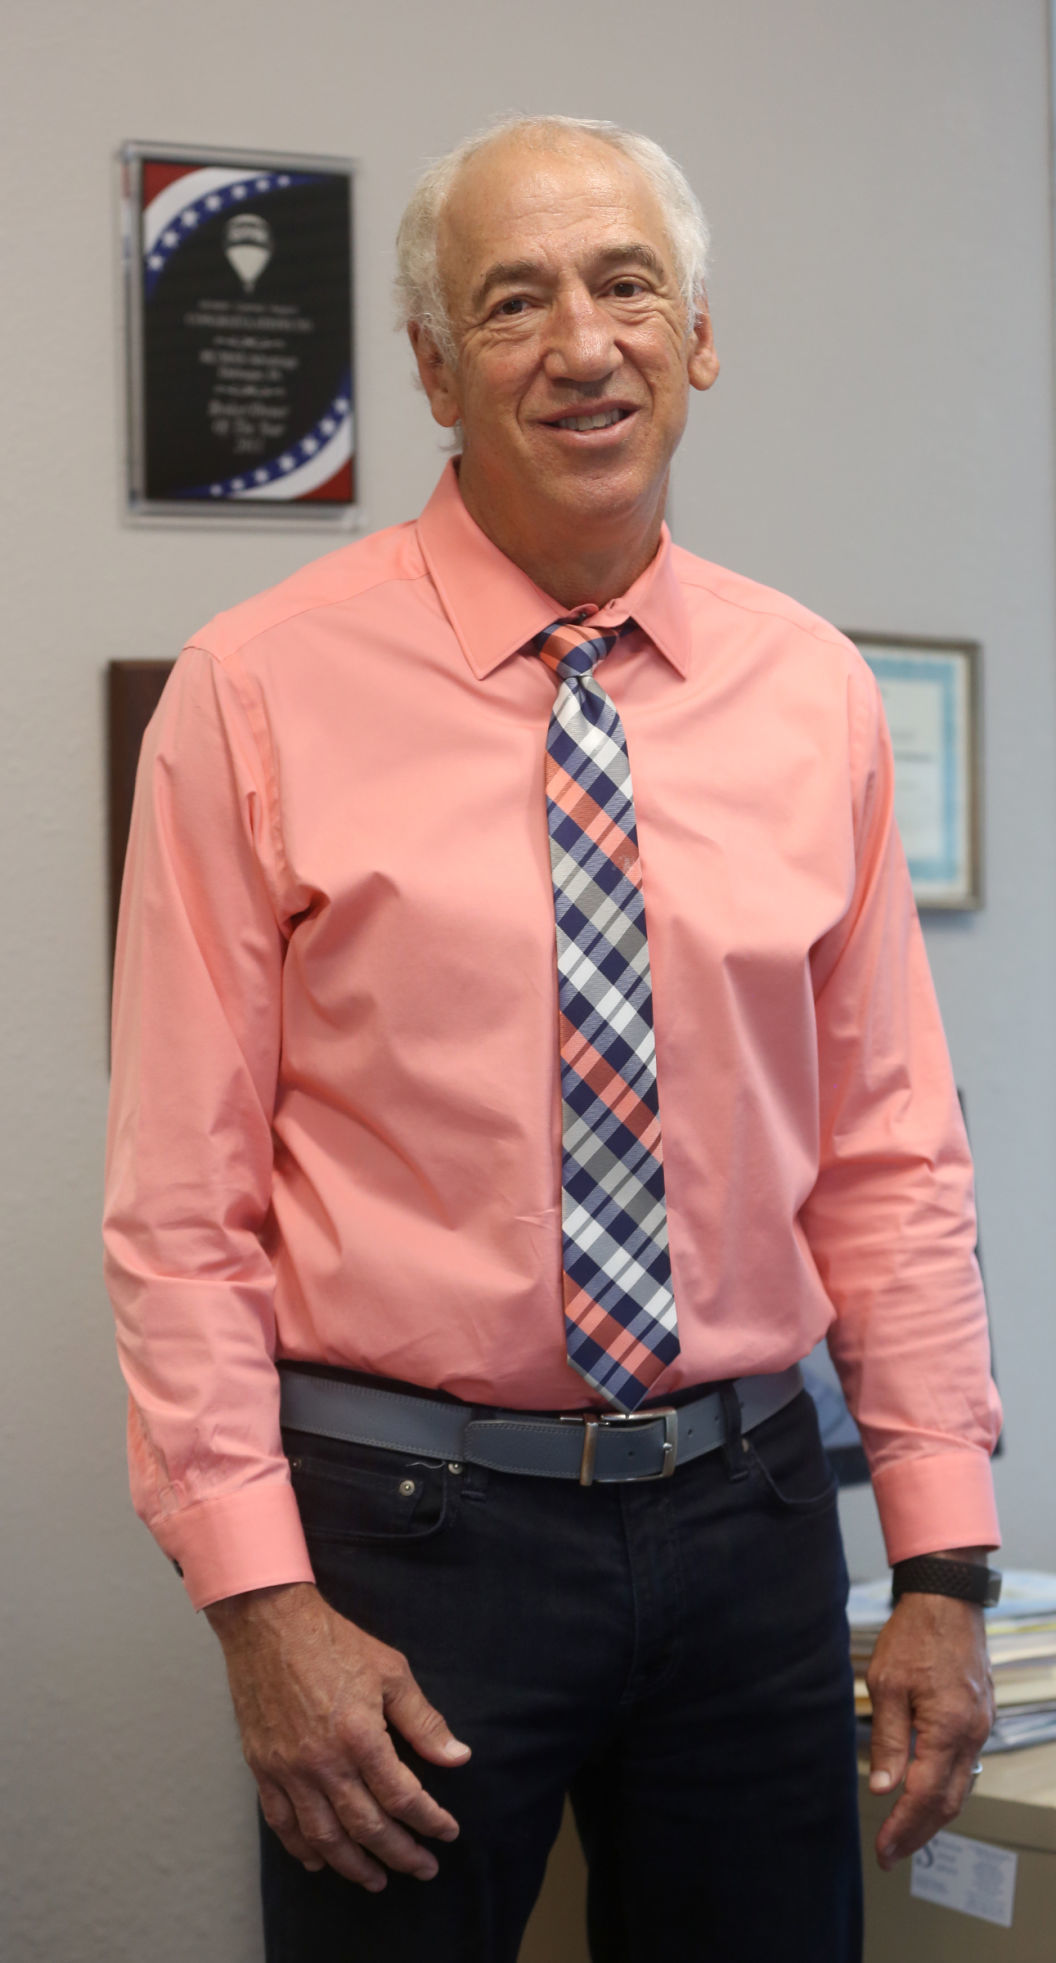 Greg Adams is owner and broker at ReMax Advantage Realty and will be featured in the Biz Times’ Meet a Local Leader. Photo taken Tuesday, May 19, 2020. PHOTO CREDIT: Jessica Reilly